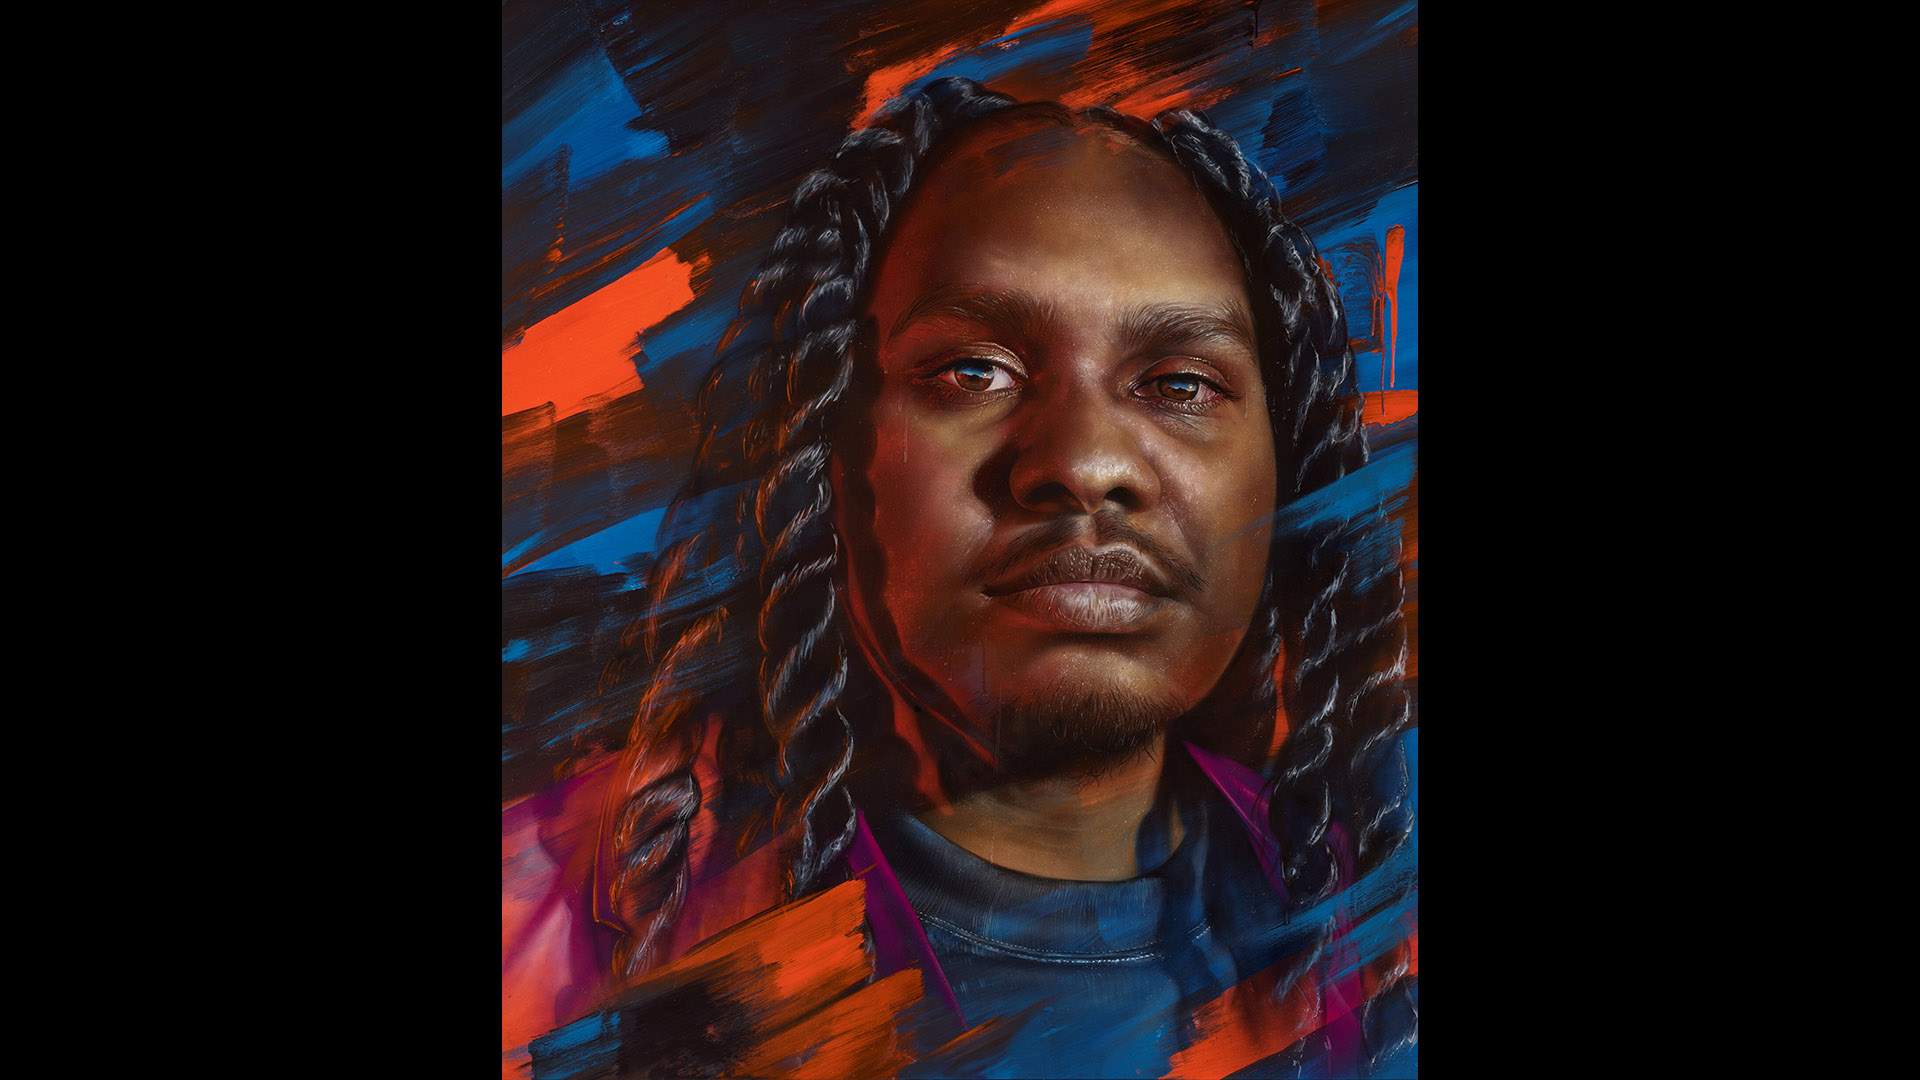 Matt Adnate's Portrait of Baker Boy Just Won the Archibald Packing Room Prize Among 2024's Finalists